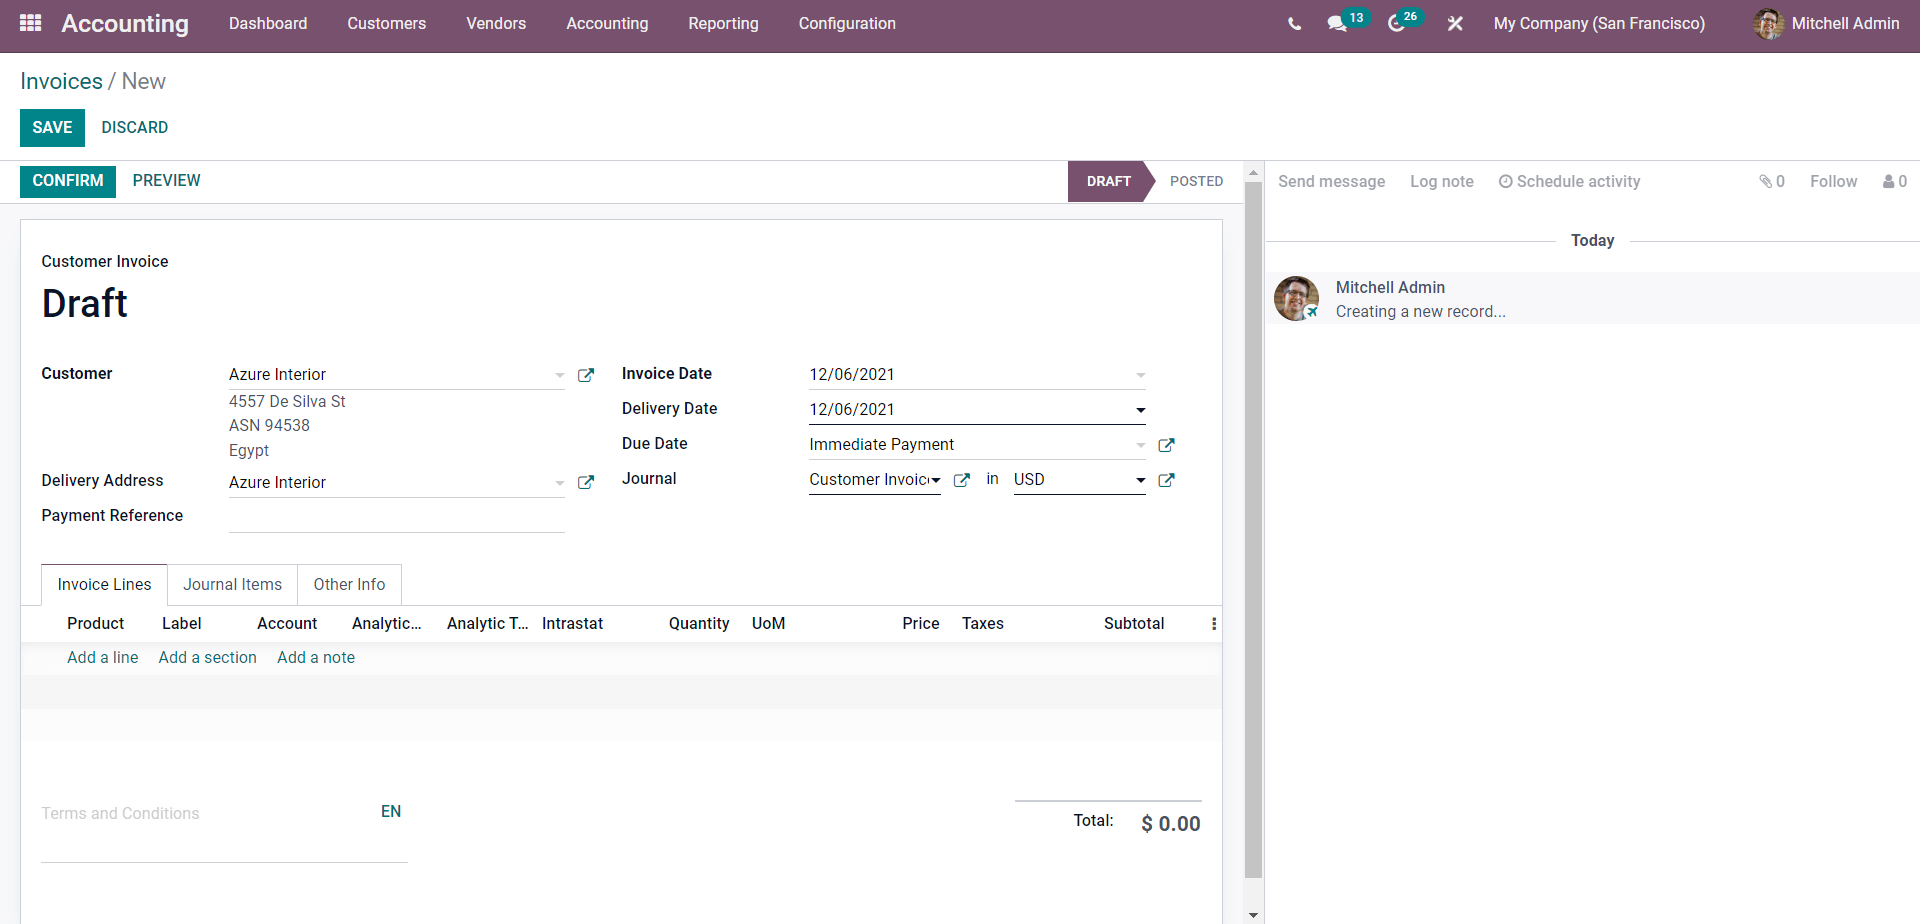 an-insight-into-journal-types-and-management-in-odoo-accounting